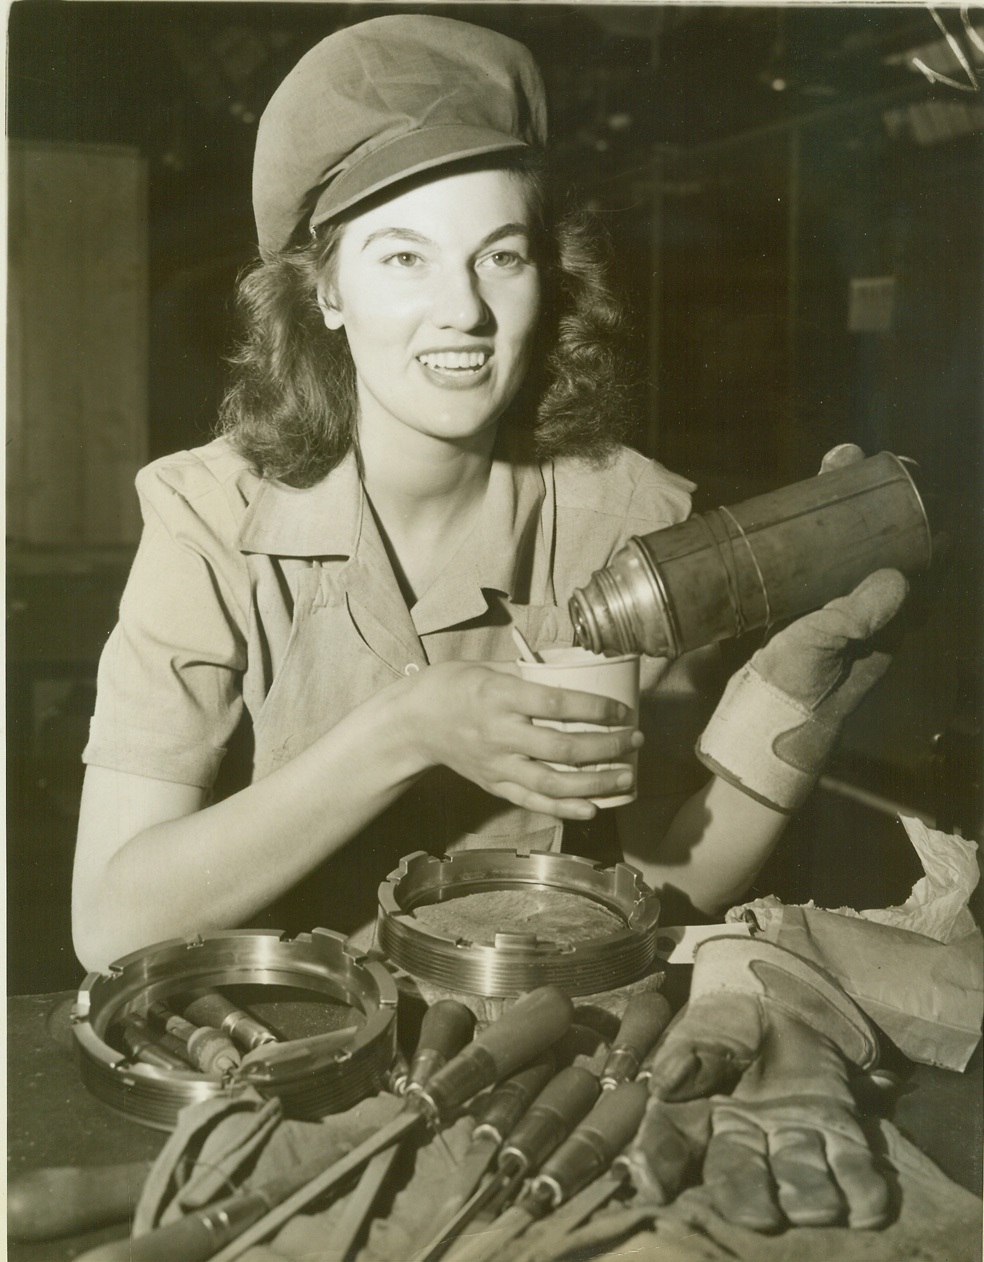 WOMEN ENTER ANOTHER WAR INDUSTRY, 4/17/1943. The women of America are plunging more and more whole-heartedly into America’s tremendous war production effort. With husbands, brothers and sweethearts in the Armed Forces, modern women are doing their patriotic bit in the nation’s factories, as well as in uniformed services. The uniform for them is overalls or slacks, and many have left clean, leisurely office jobs for positions as inspectors, equipment handlers or actual machine jobs. In this New Jersey propeller factory an initial group of 14 women began work Jan. 29, 1942, after a six-weeks vocational school course, and the feminine element is appearing in ever-increasing numbers among workers fashioning the blades that will drive the war planes which will drive the Axis from the skies. This series shows some of the “bladeswomen” at their work. Time out for lunch amid an atmosphere of tools and gloves. A far cry from metropolitan tea rooms many of the workers formerly frequented. Credit: OWI Radiophoto from ACME;